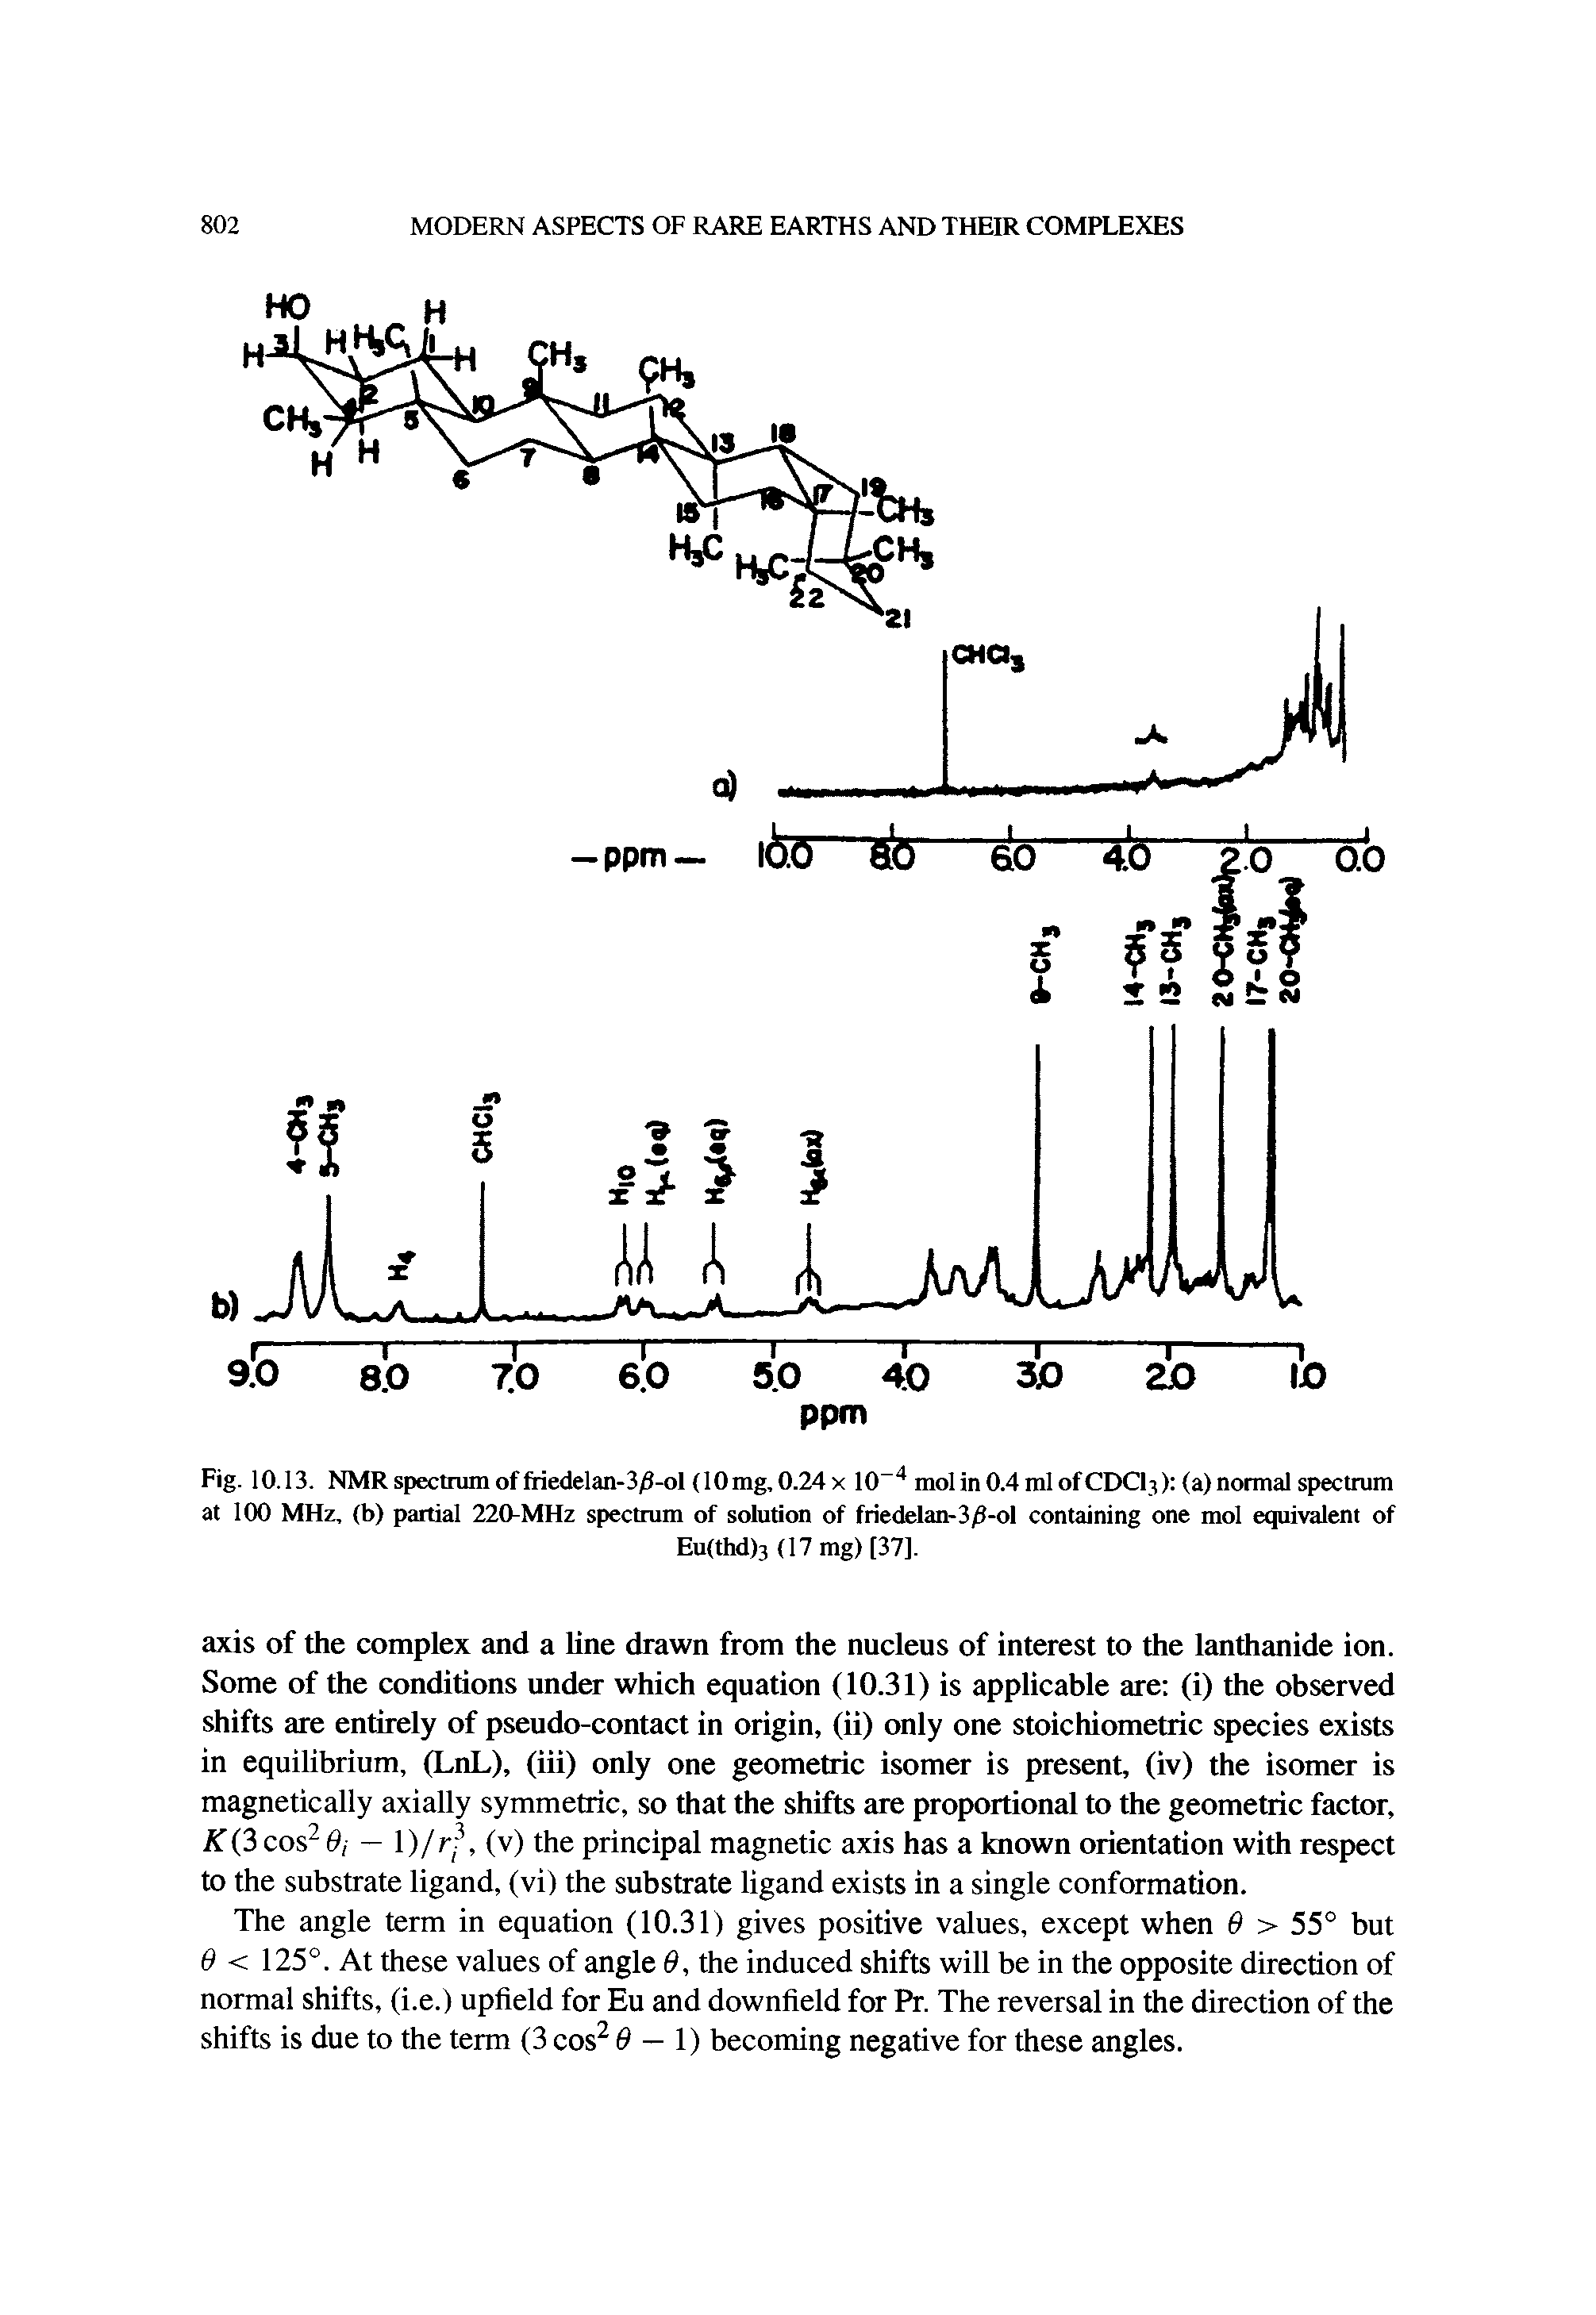 Fig. 10.13. NMR spectrum of friedelan-3/l-ol (10mg, 0.24 x 10-4 mol in 0.4 ml of CDCI3) (a) normal spectrum at 100 MHz, (b) partial 220-MHz spectrum of solution of friedelan-3/l-ol containing one mol equivalent of...